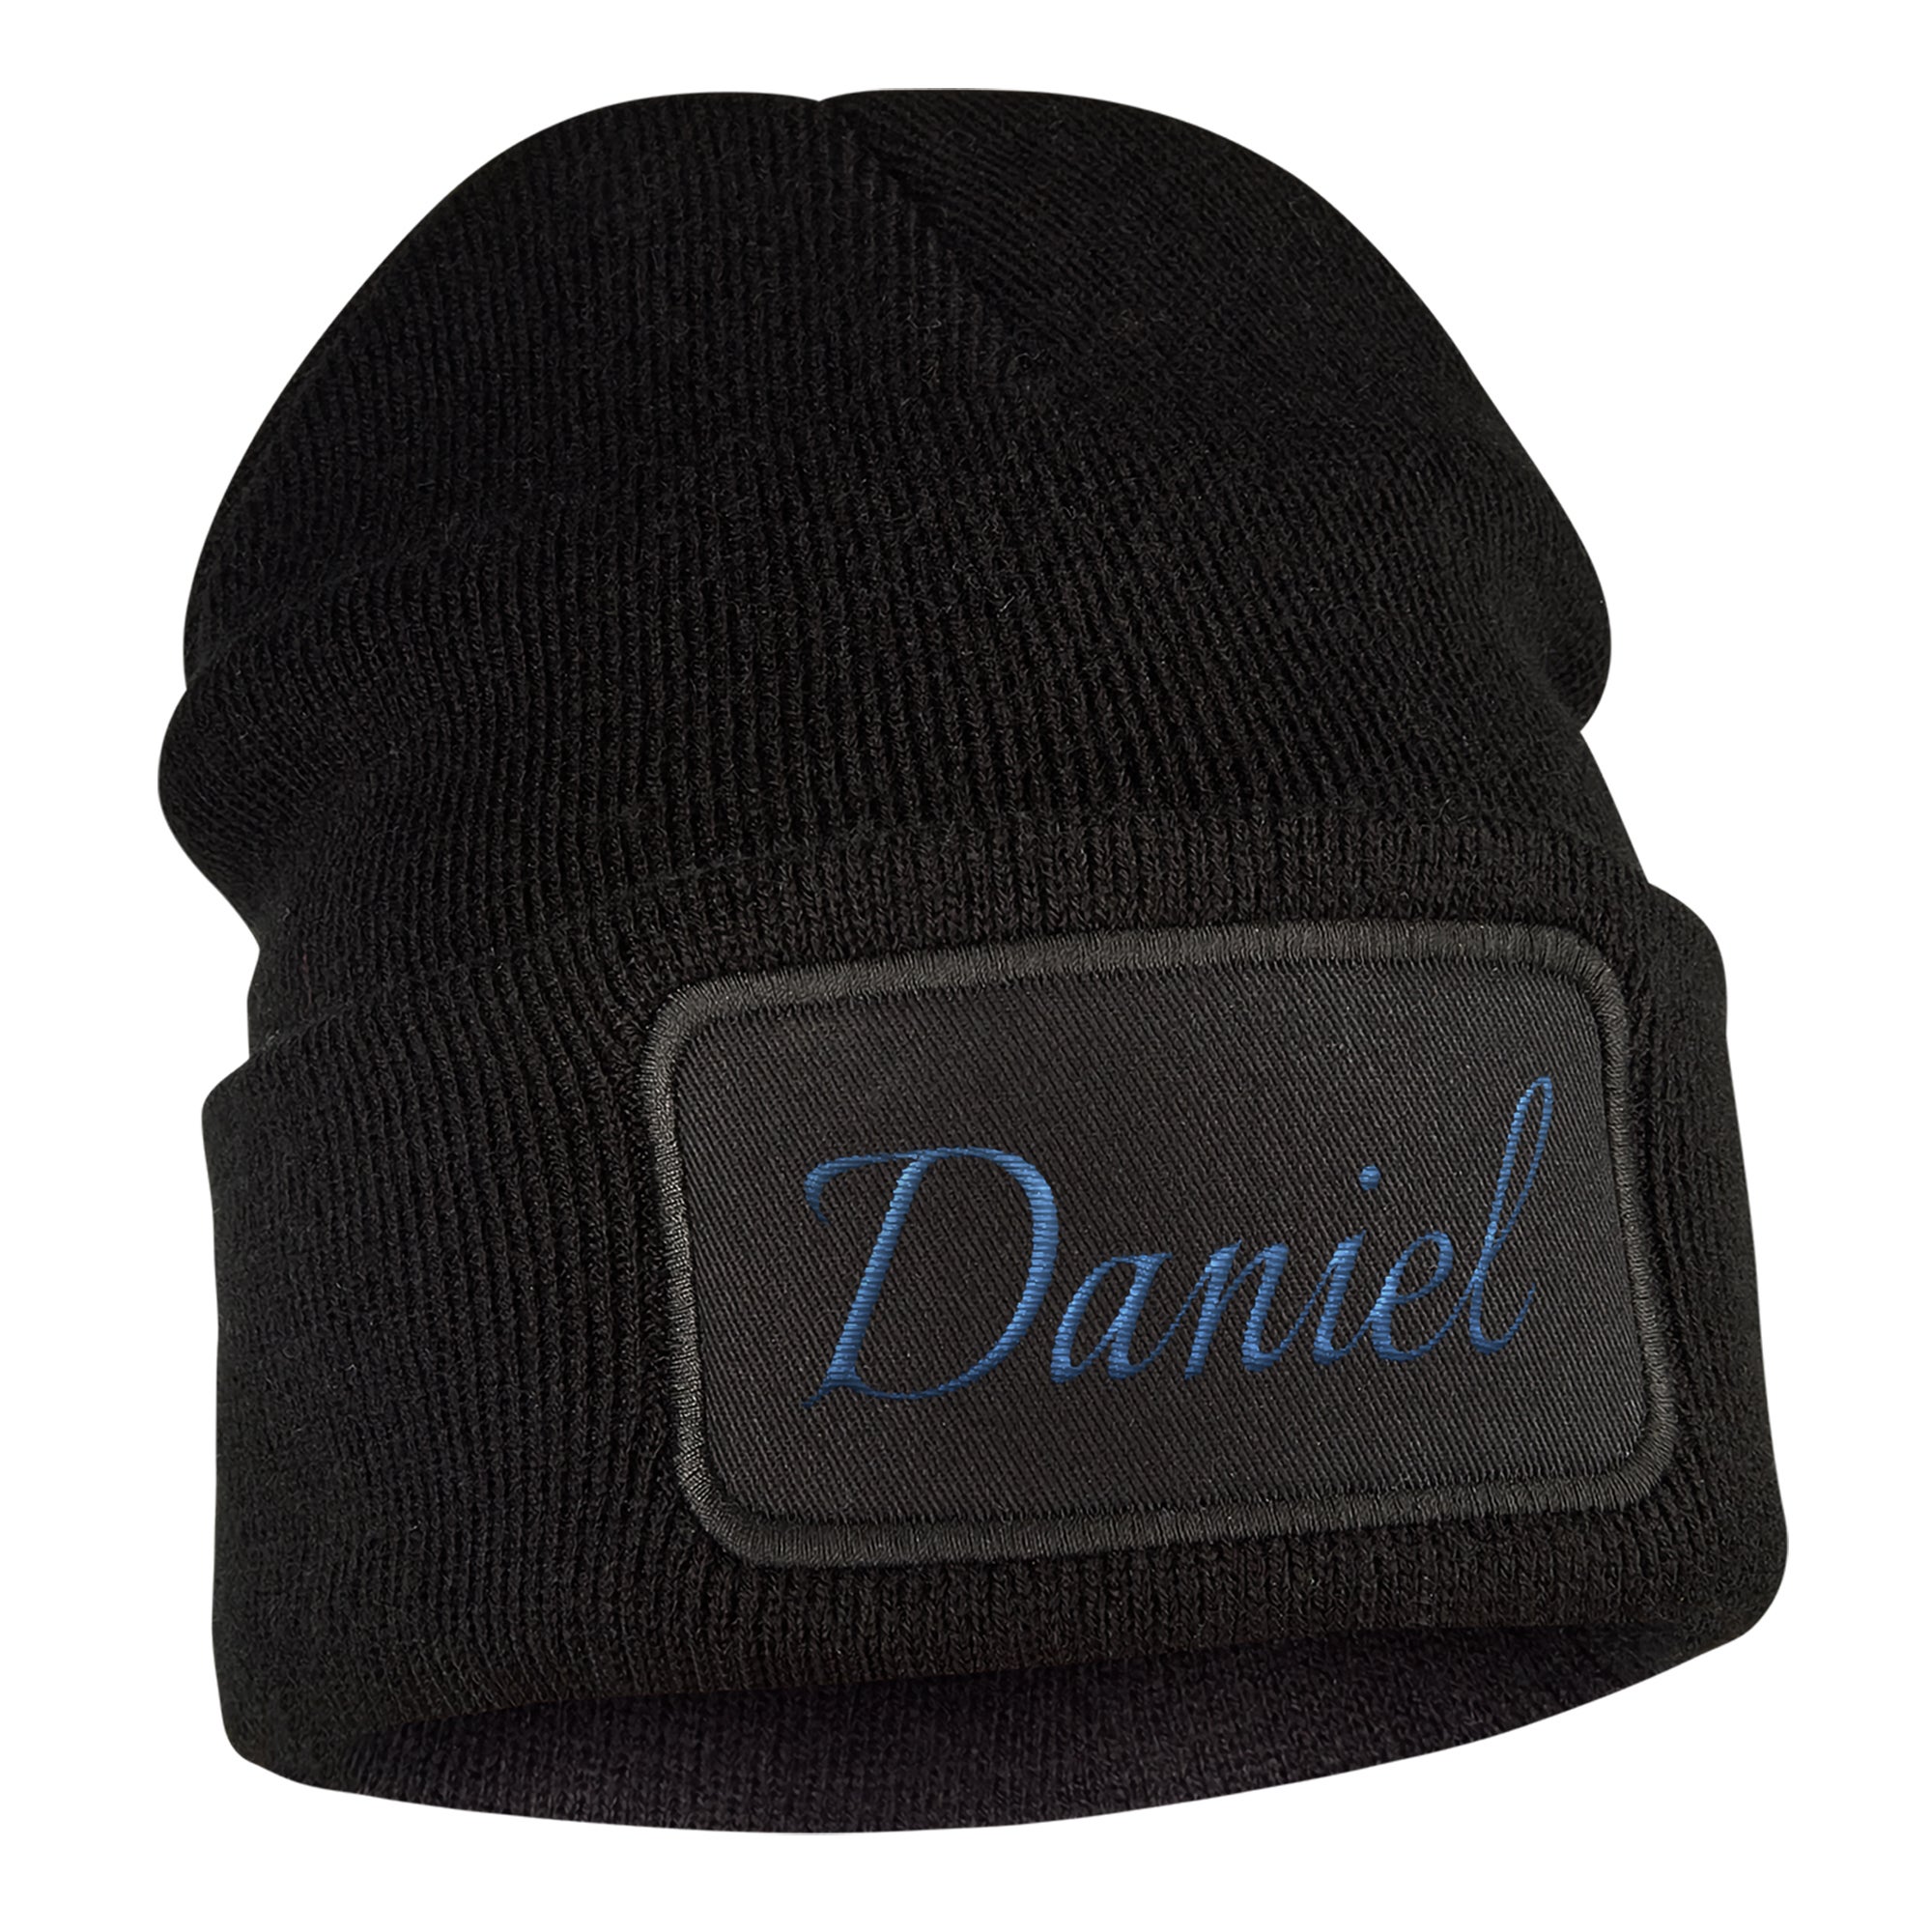 Personalised beanie - Embroidered - Black